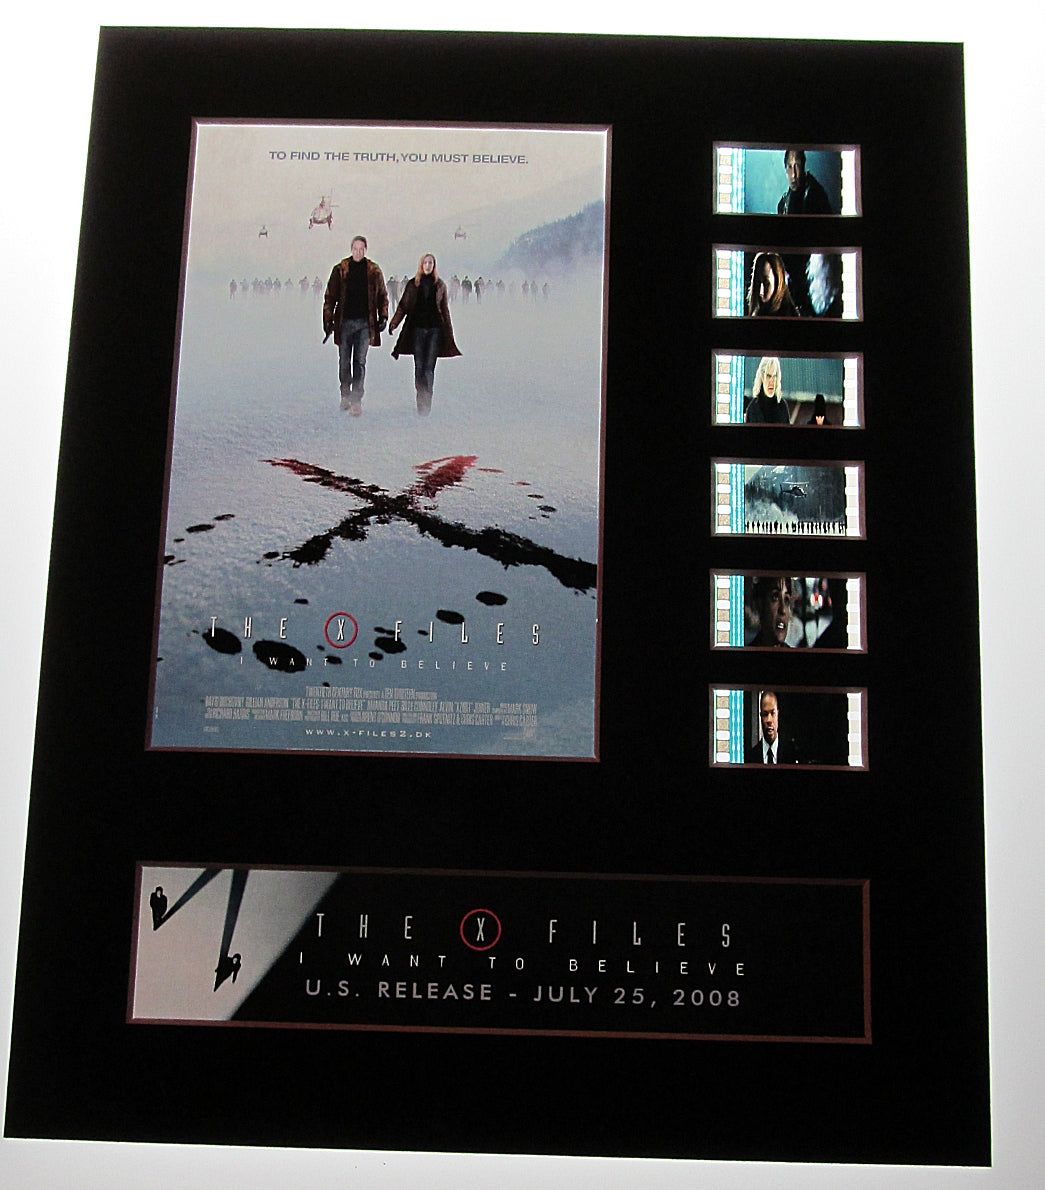 THE X-FILES 2 : I WANT TO BELIEVE 35mm Movie Film Cell Display 8x10 Presentation